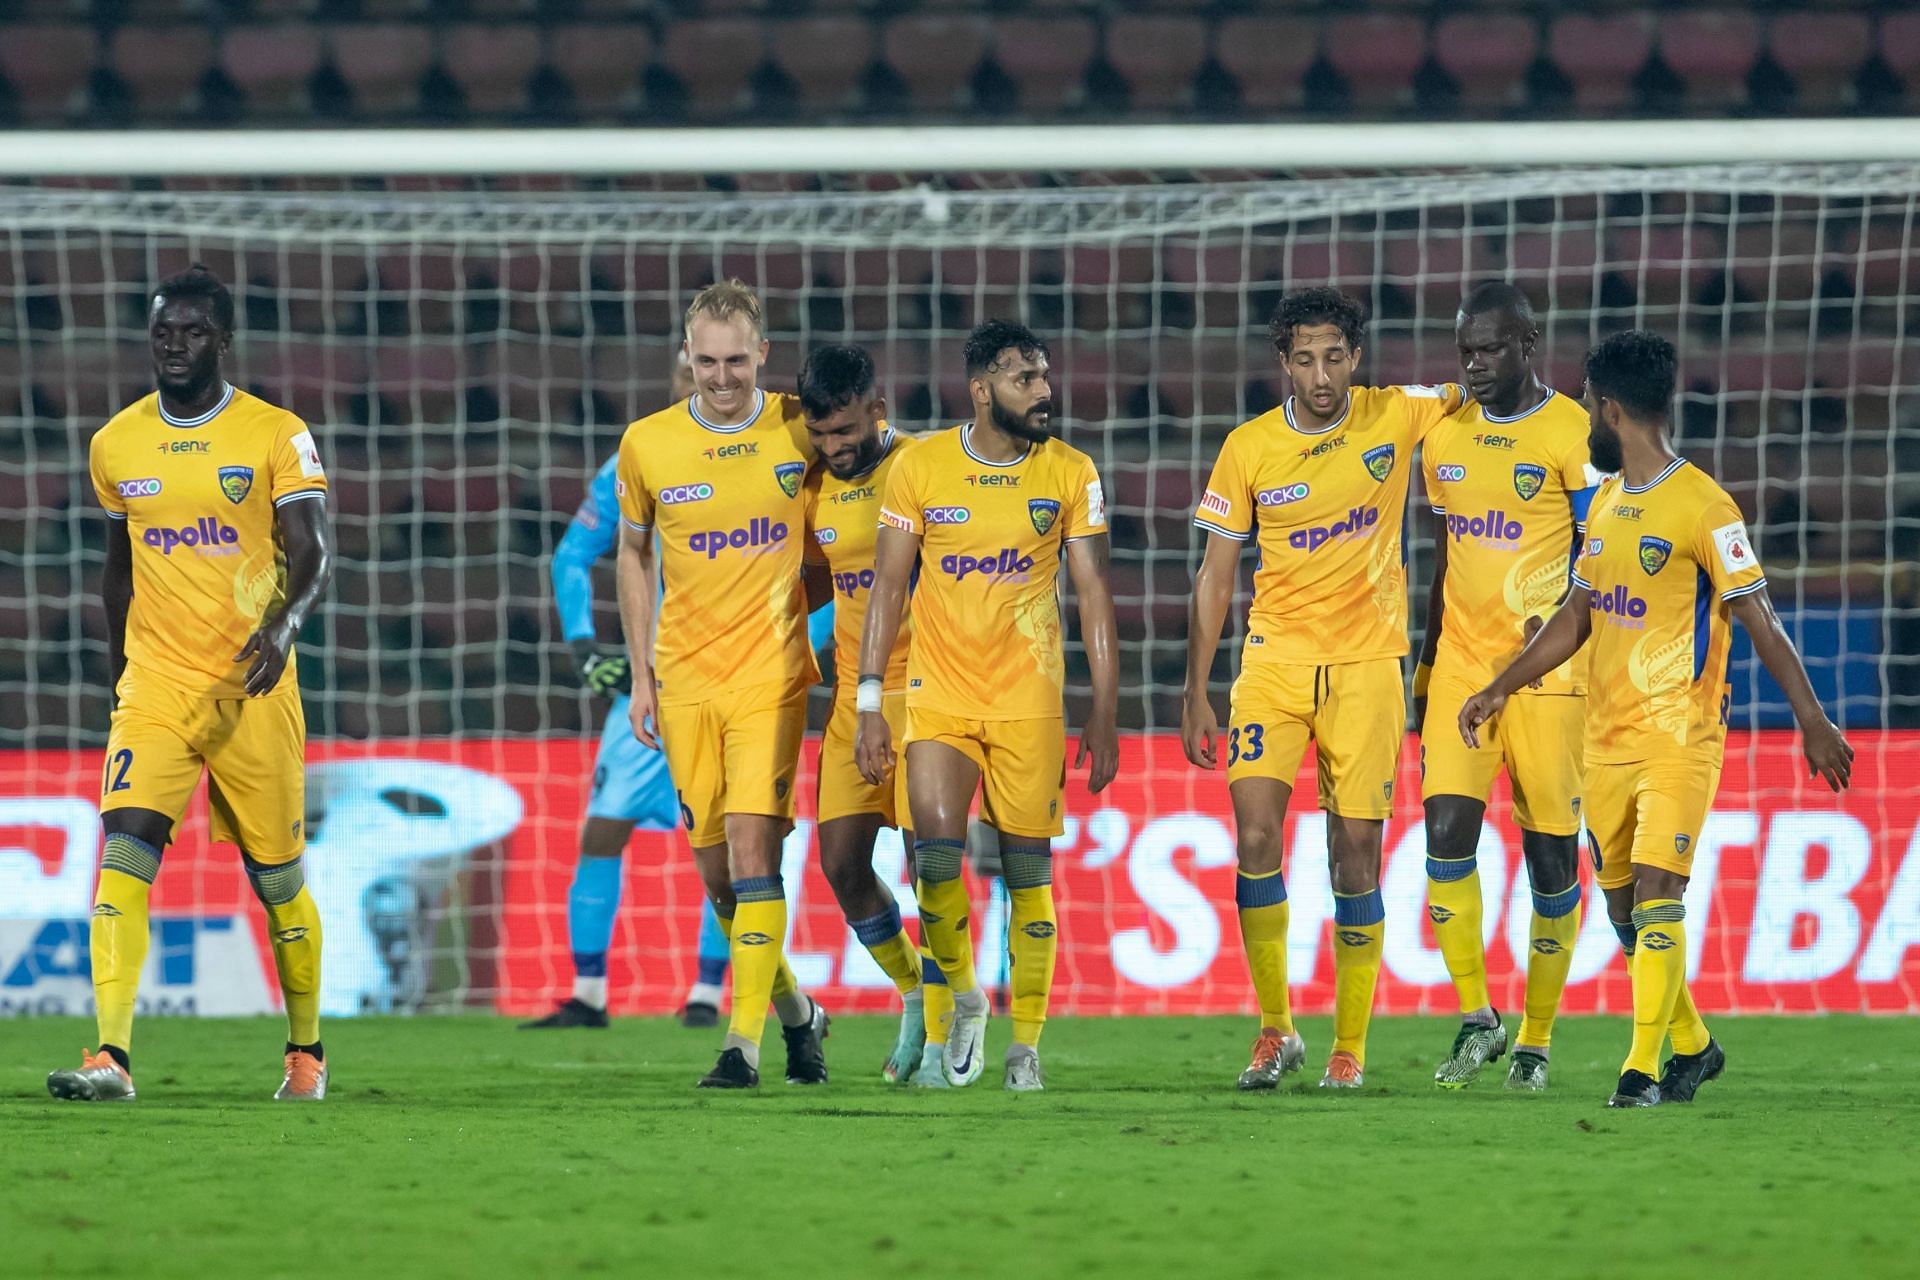 Chennaiyin FC will be looking to cap off their league campaign with a victory against NorthEast United. (Image credits: ISL)